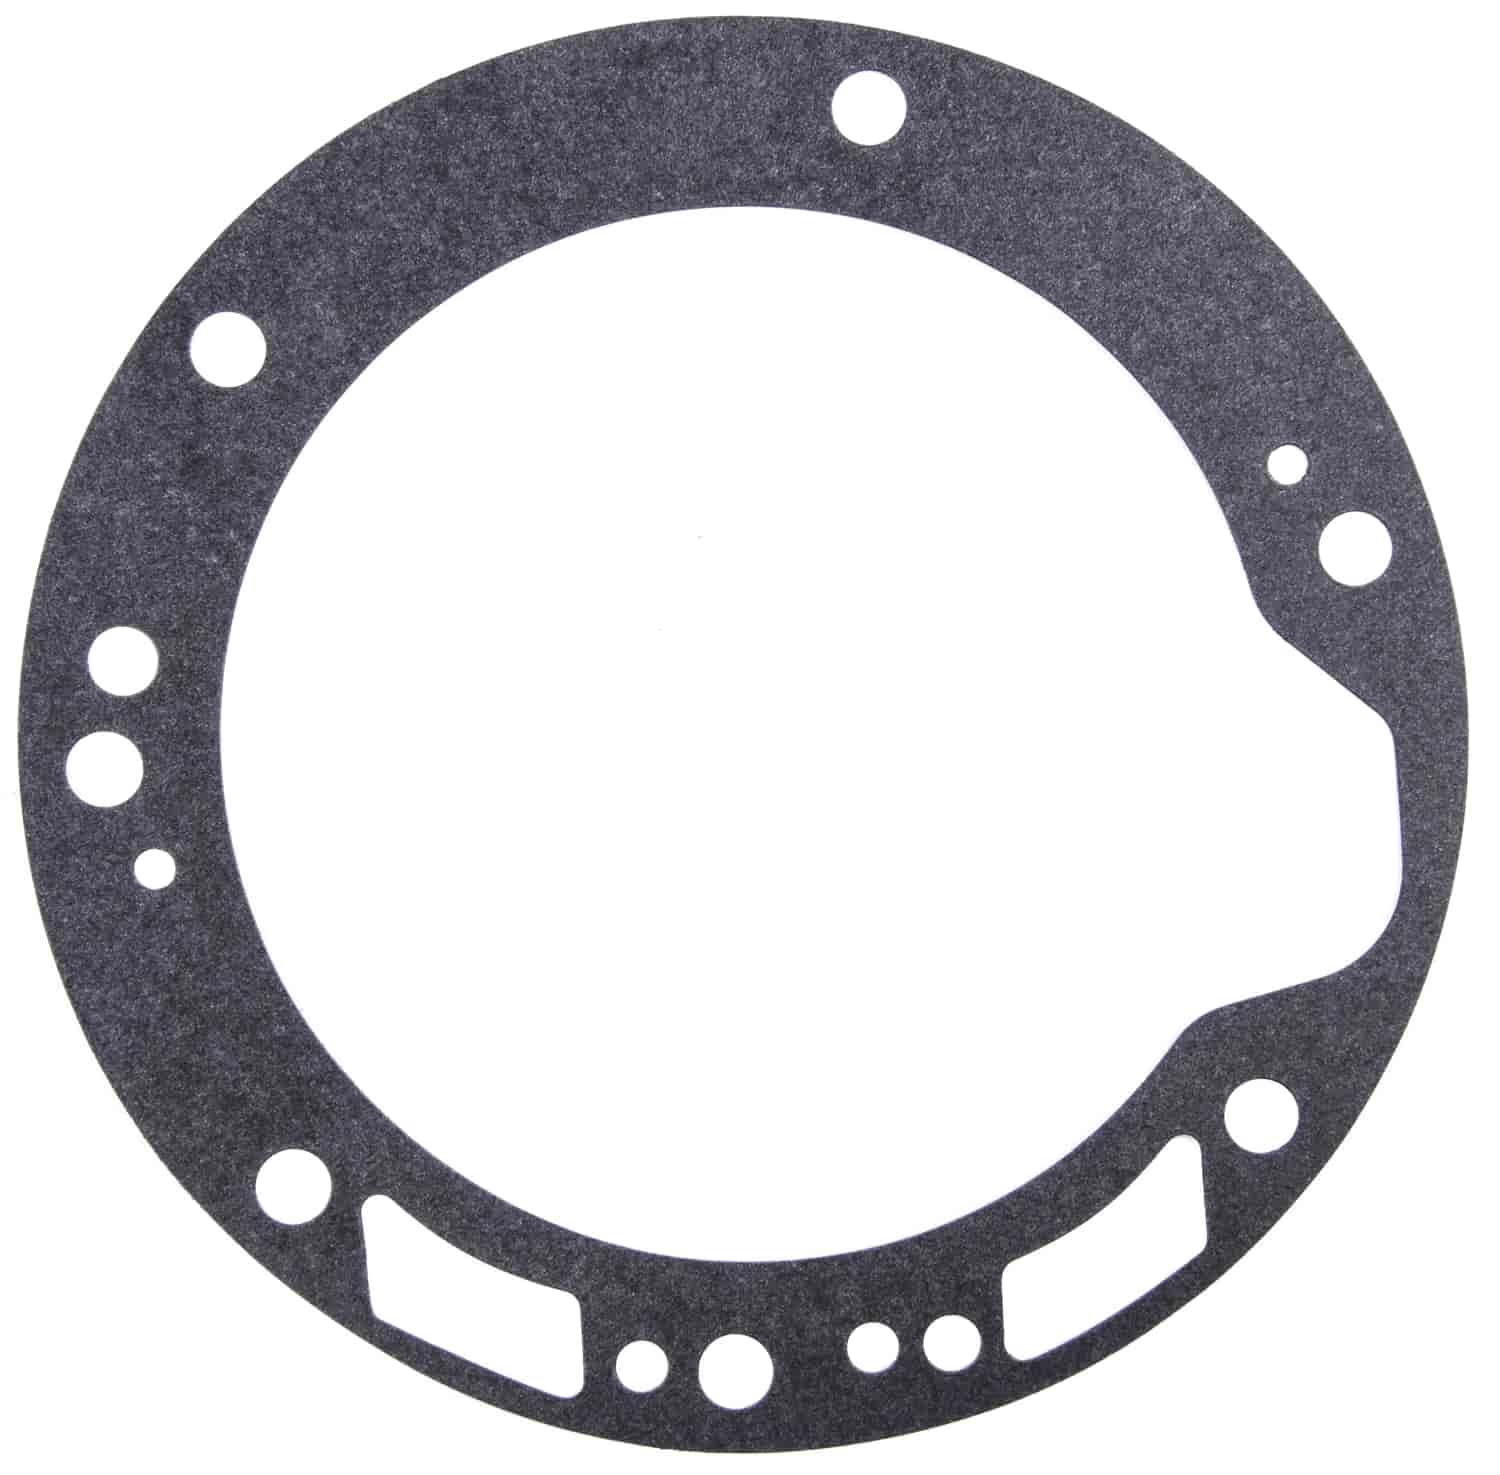 Automatic Transmission Front Pump Gasket for Ford C4